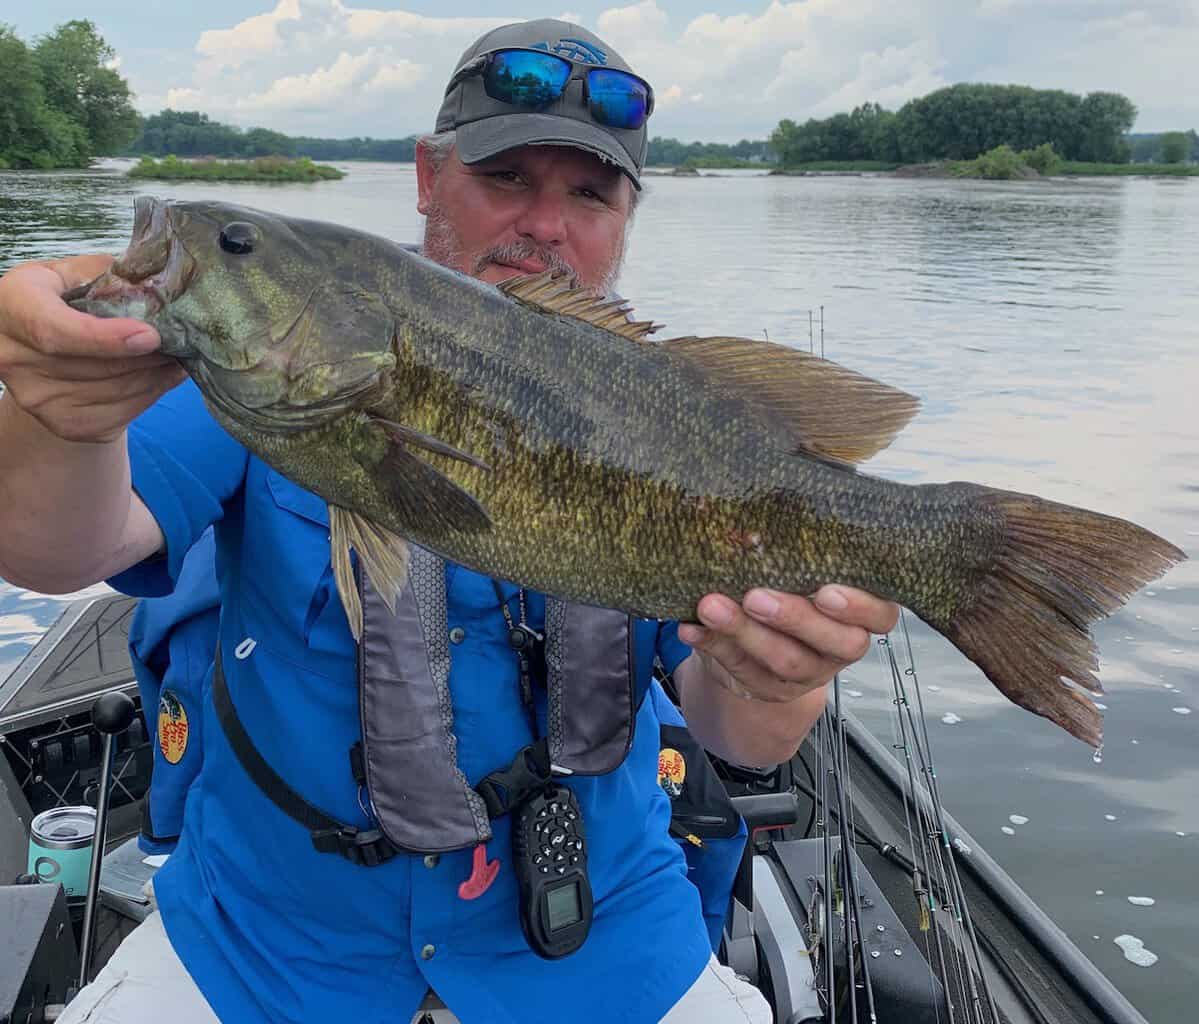 Man on a boat holds up a large smallmouth bass he caught fishing on the lower Susquehanna River.